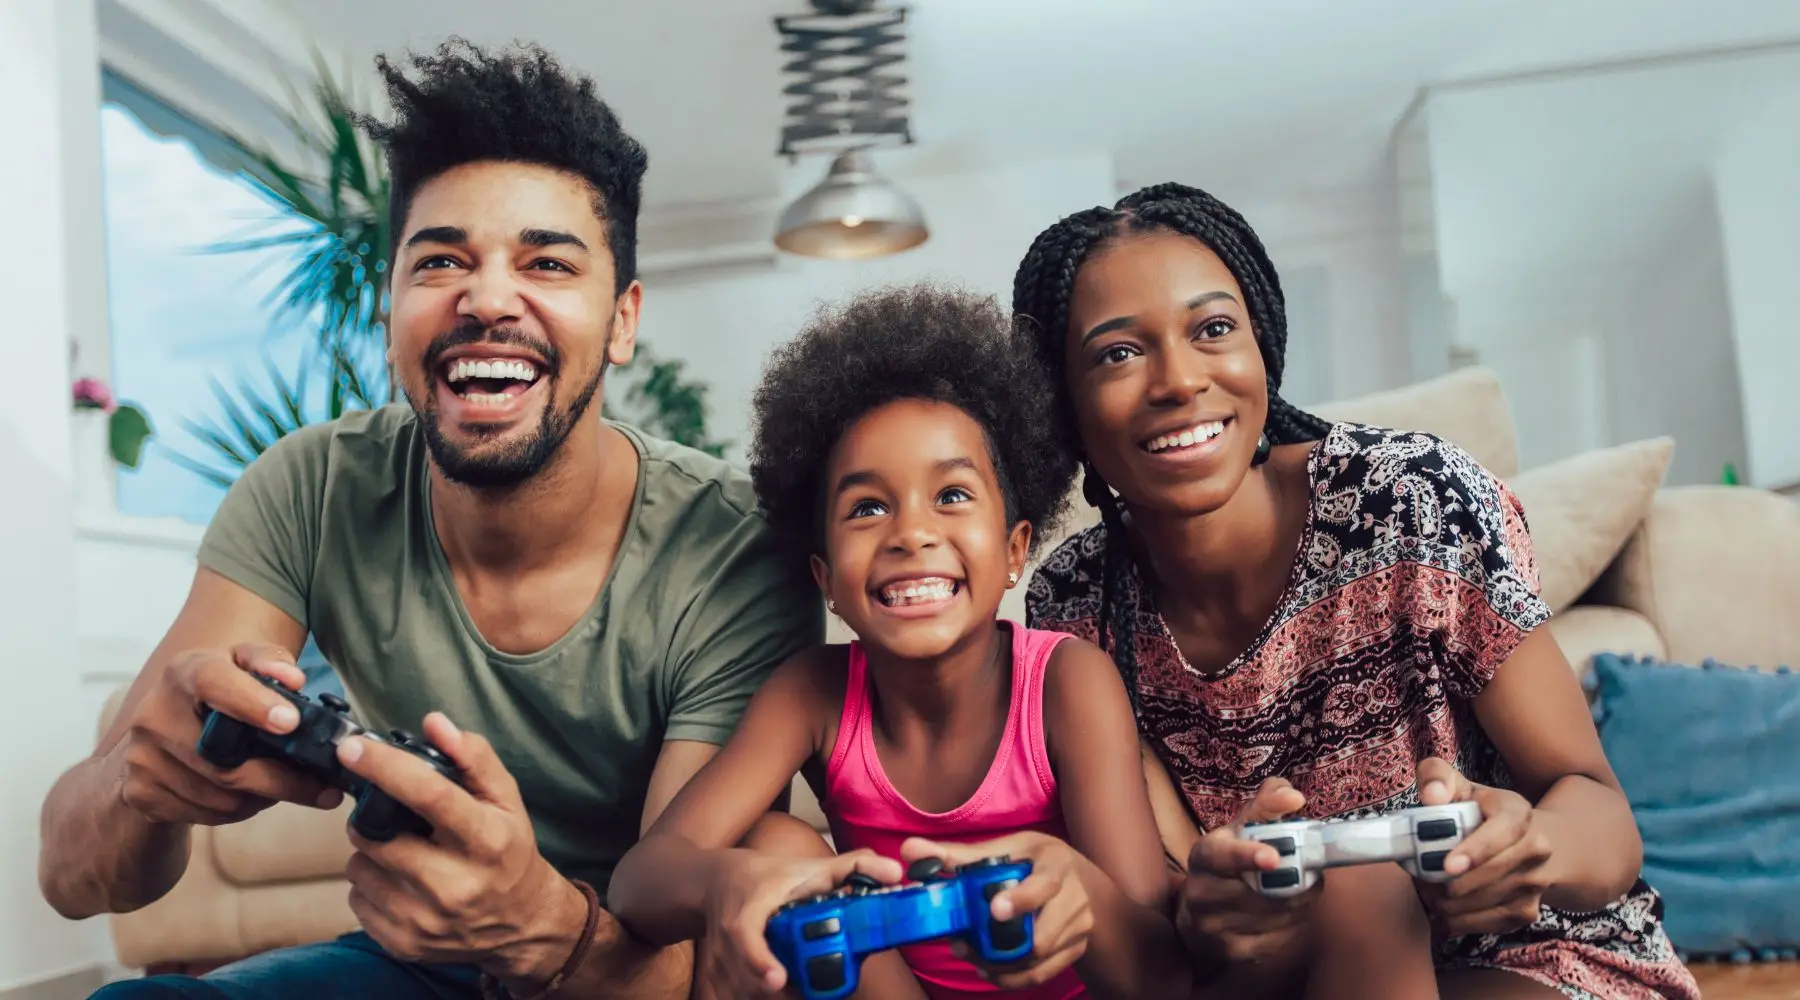 Family playing video games together